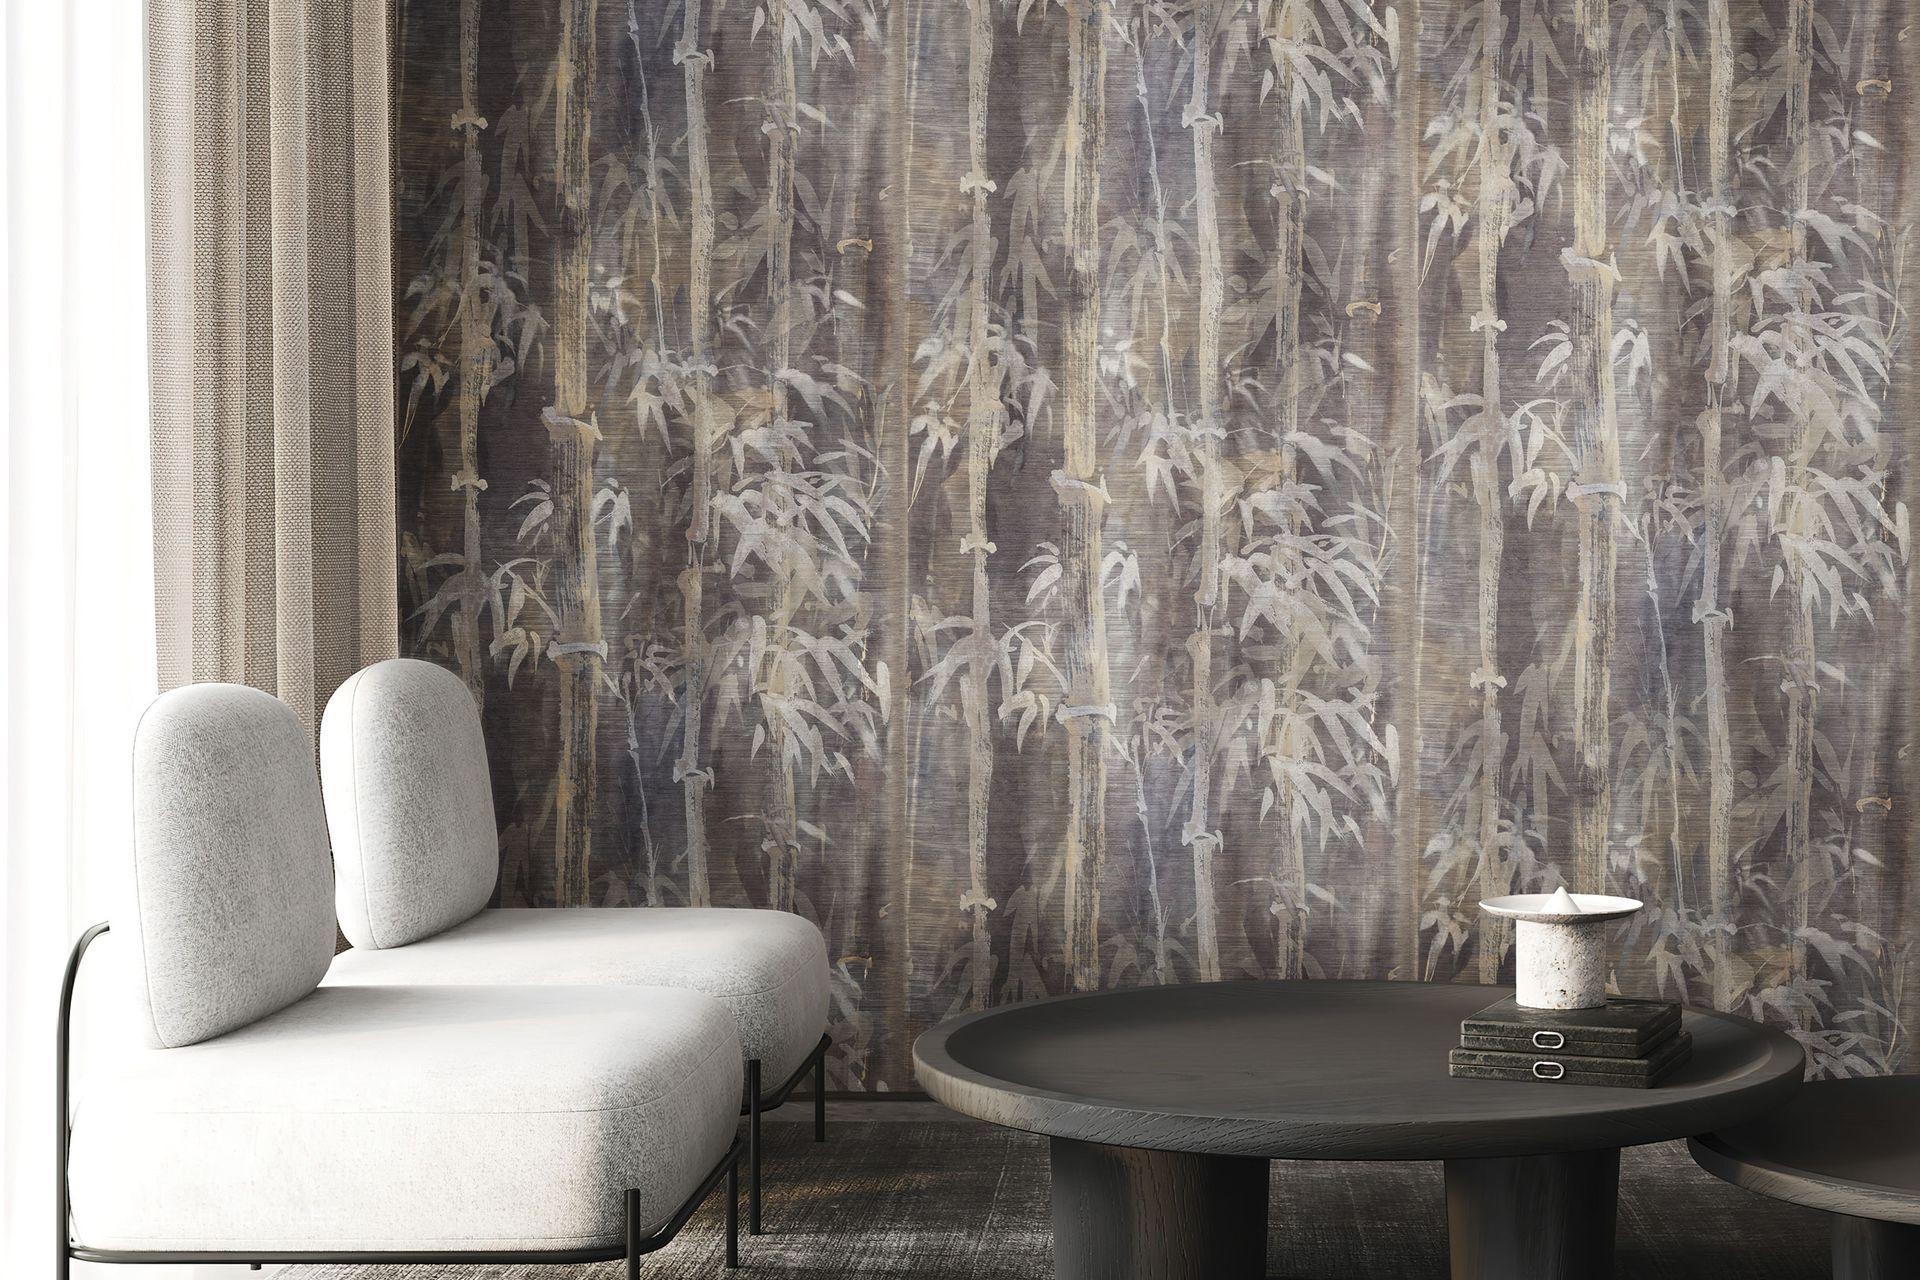 Premium wallpapers showcase intricate patterns and delicate craftsmanship.